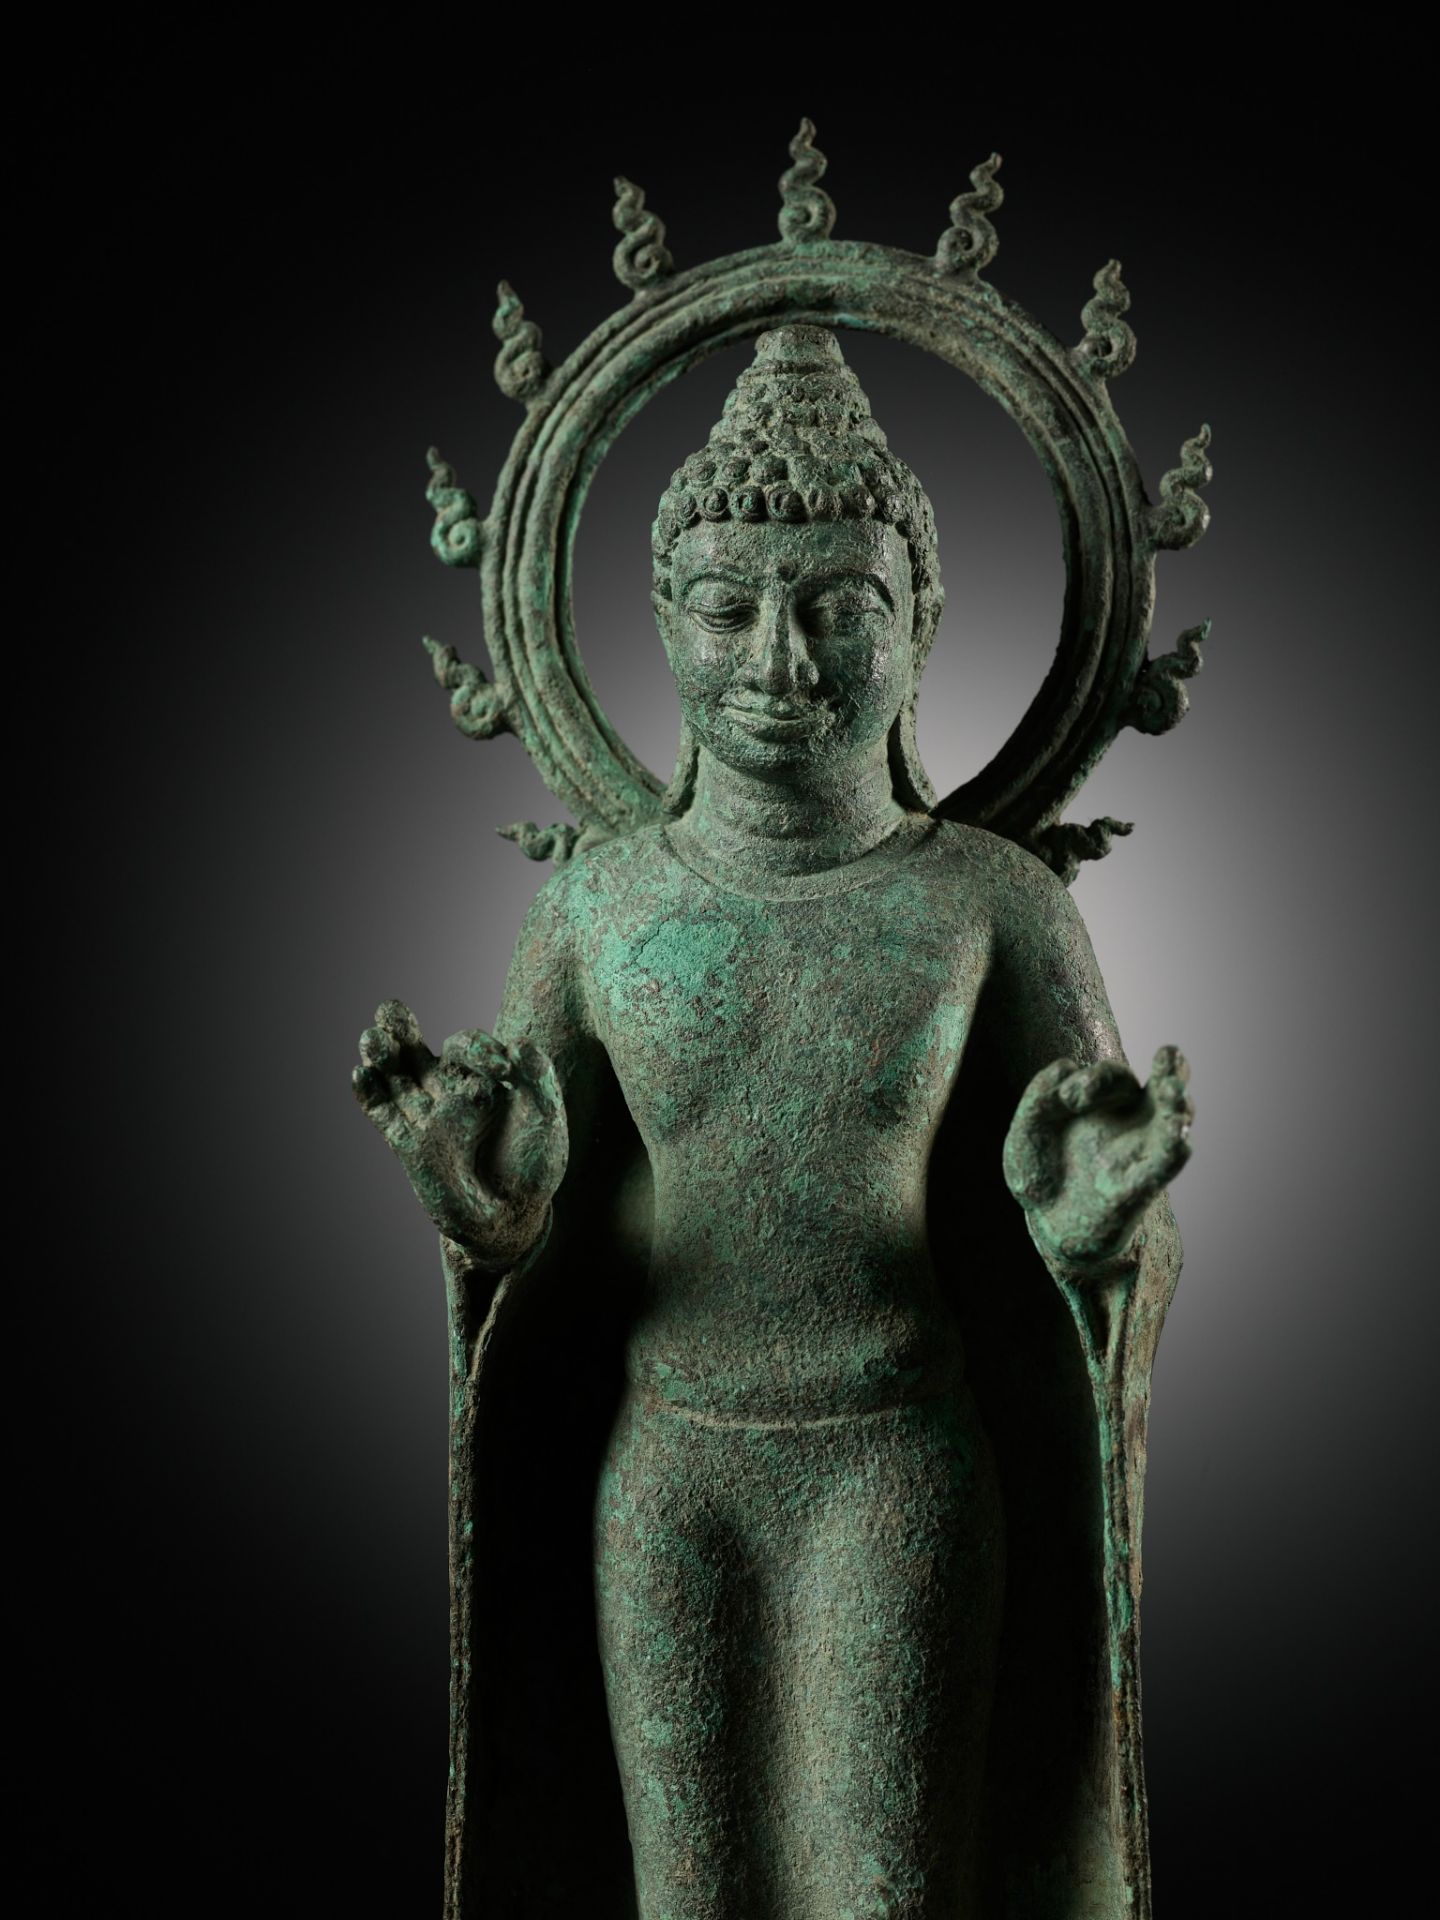 A BRONZE STATUE OF BUDDHA WITHIN A FLAMING AUREOLE, INDONESIA, CENTRAL JAVA, 8TH-9TH CENTURY - Bild 7 aus 19